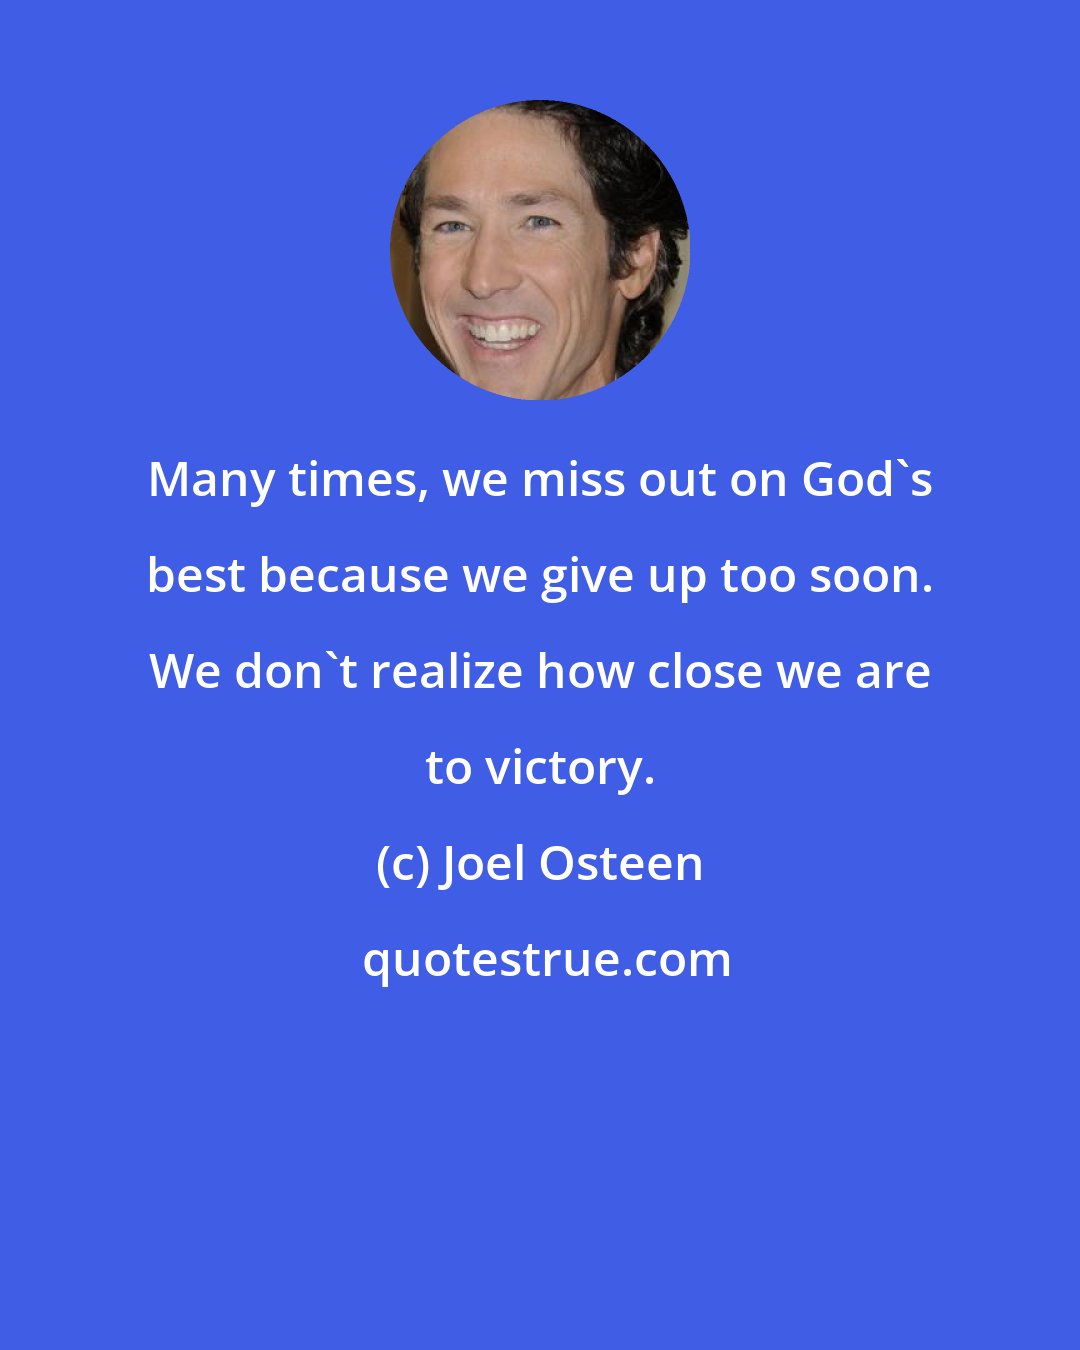 Joel Osteen: Many times, we miss out on God's best because we give up too soon. We don't realize how close we are to victory.